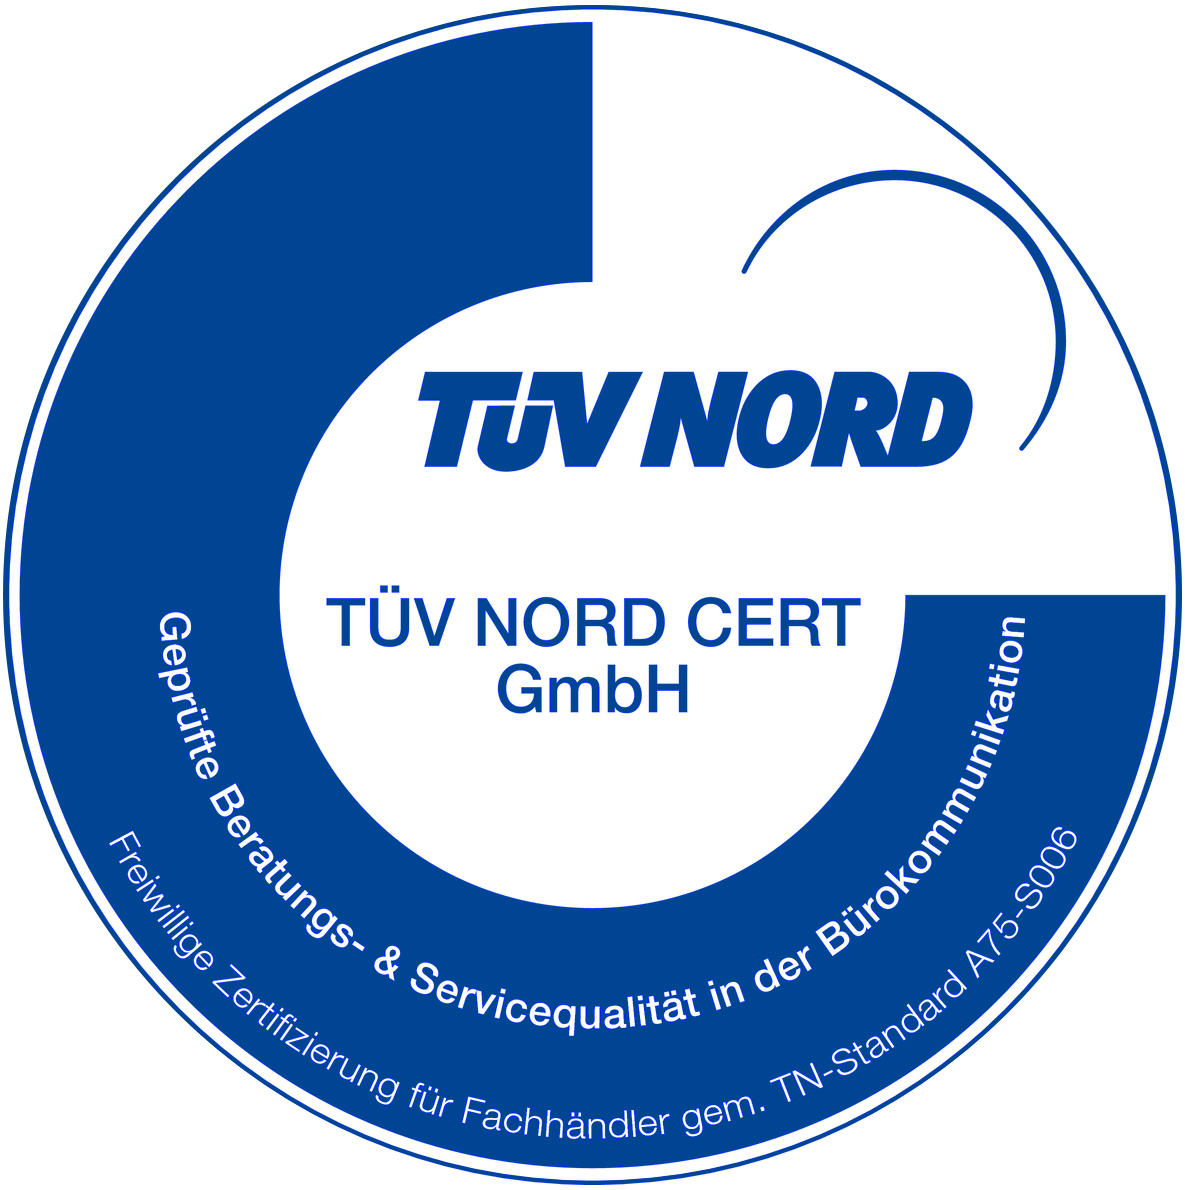 Logo of the Tüv Nord certificate